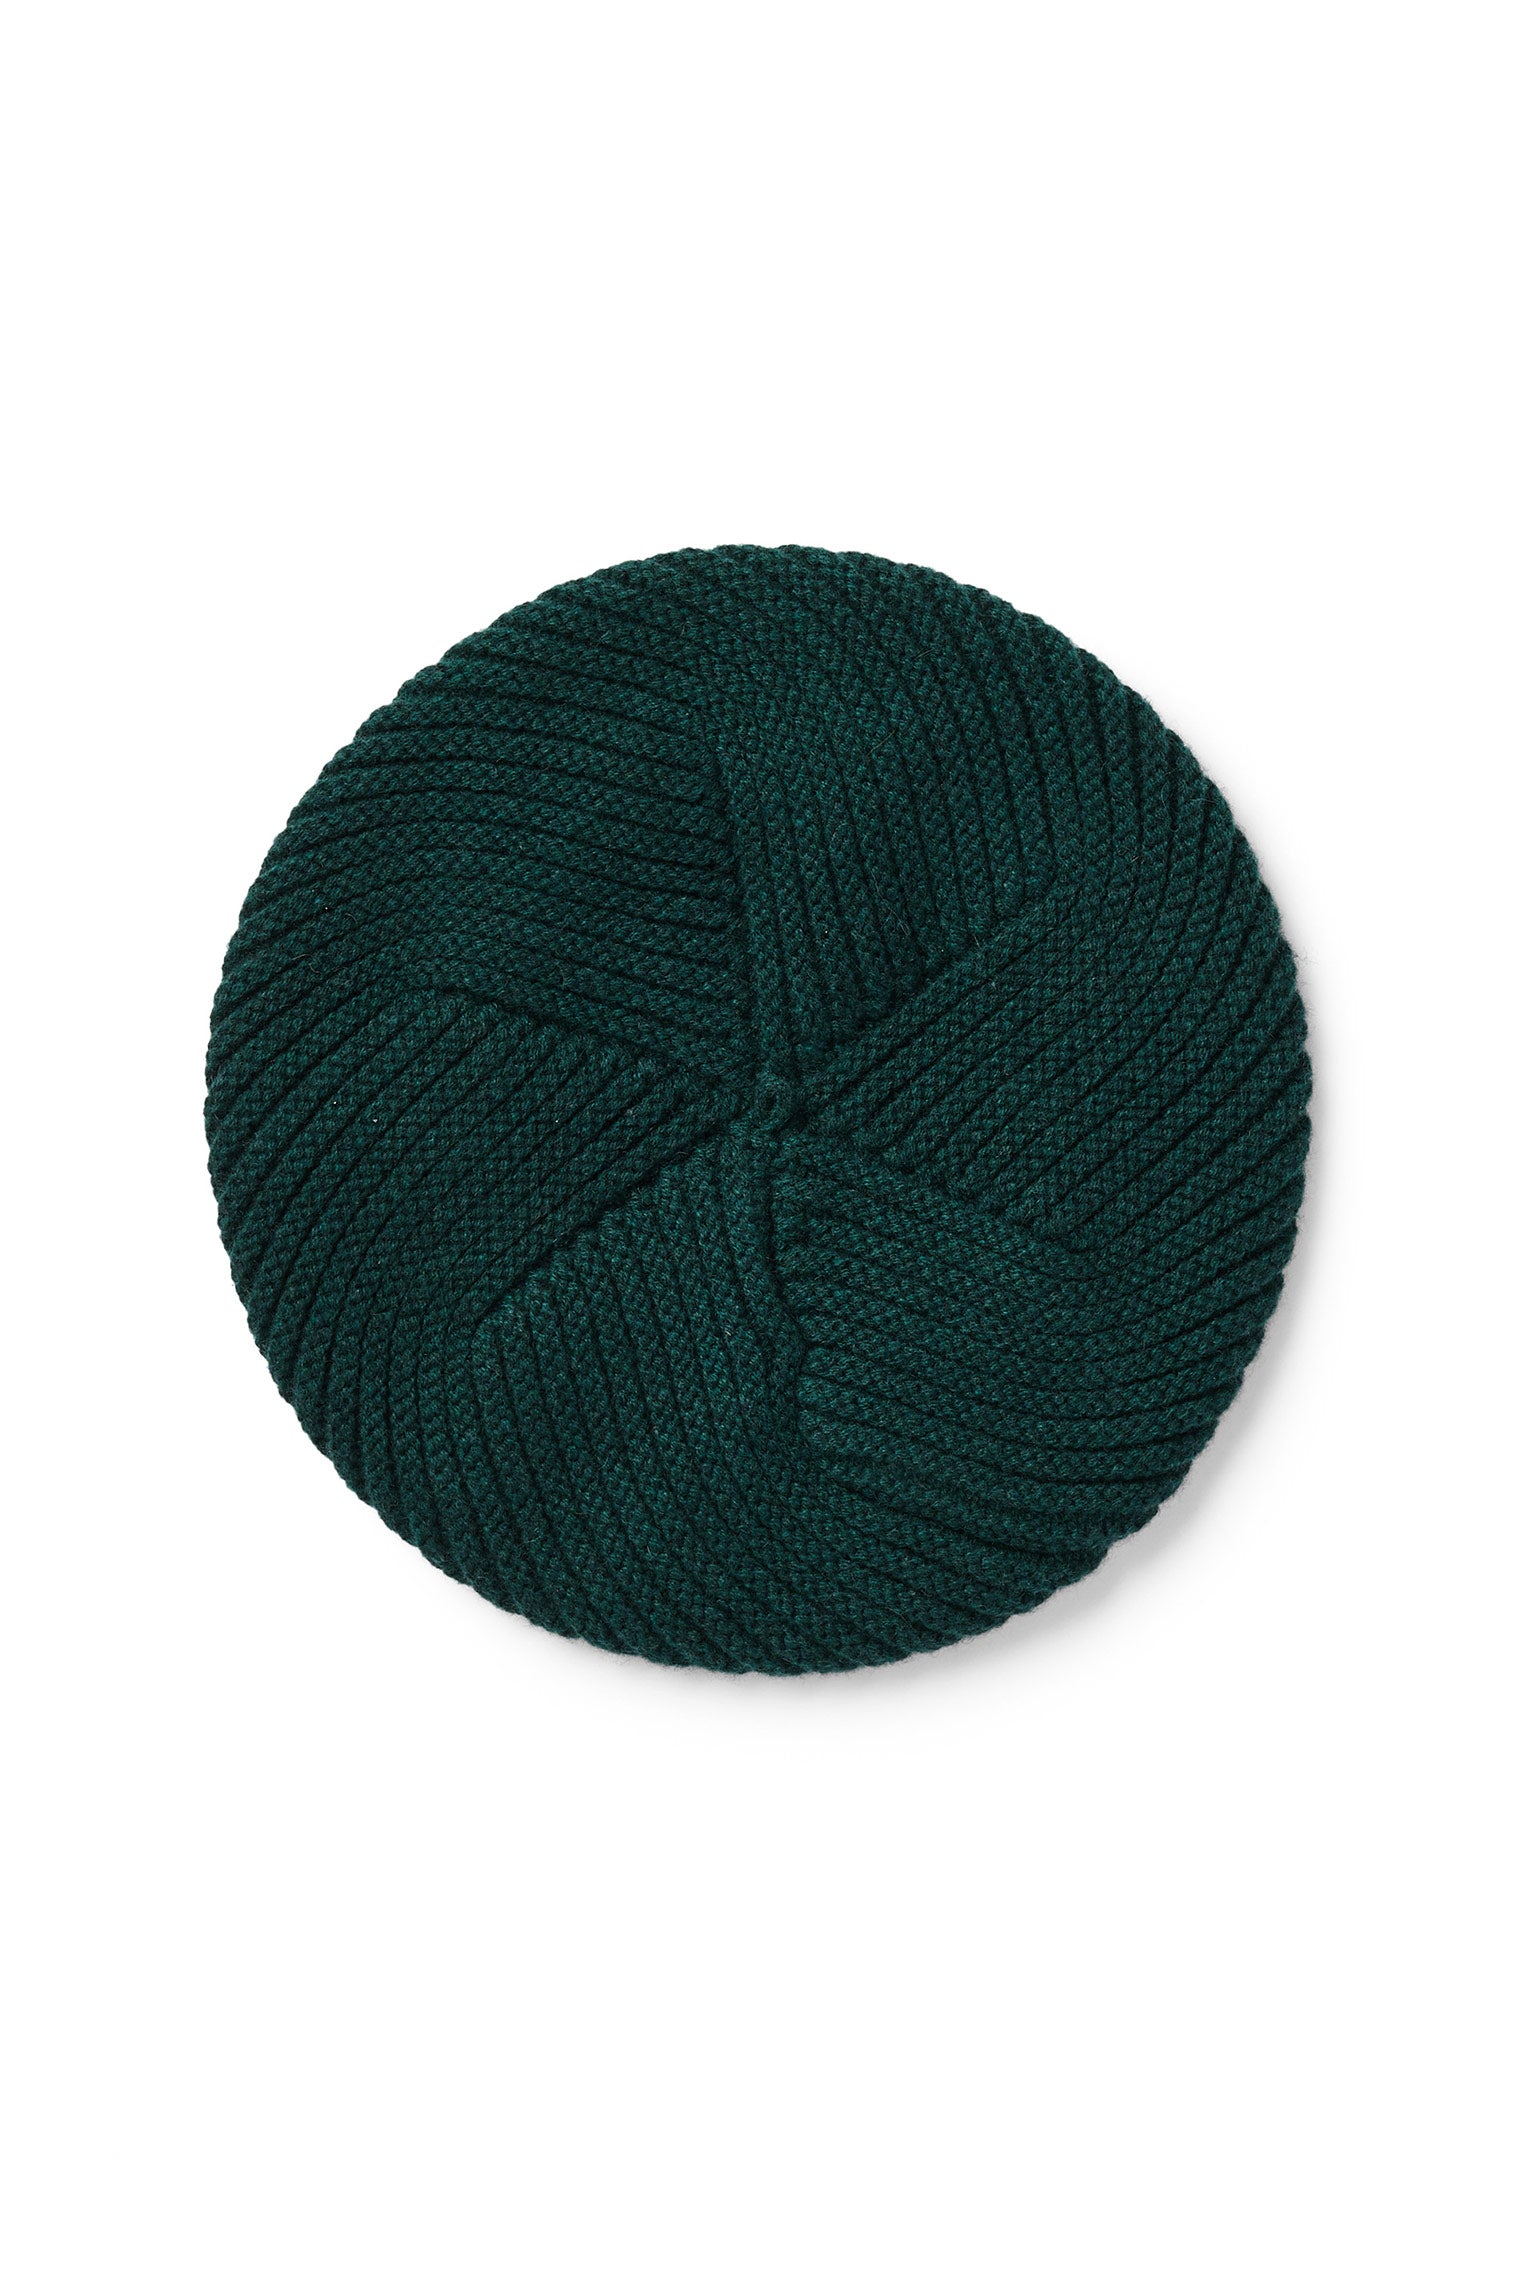 Green Knitted Cashmere Beret - Women's Beanies - Lock & Co. Hatters London UK